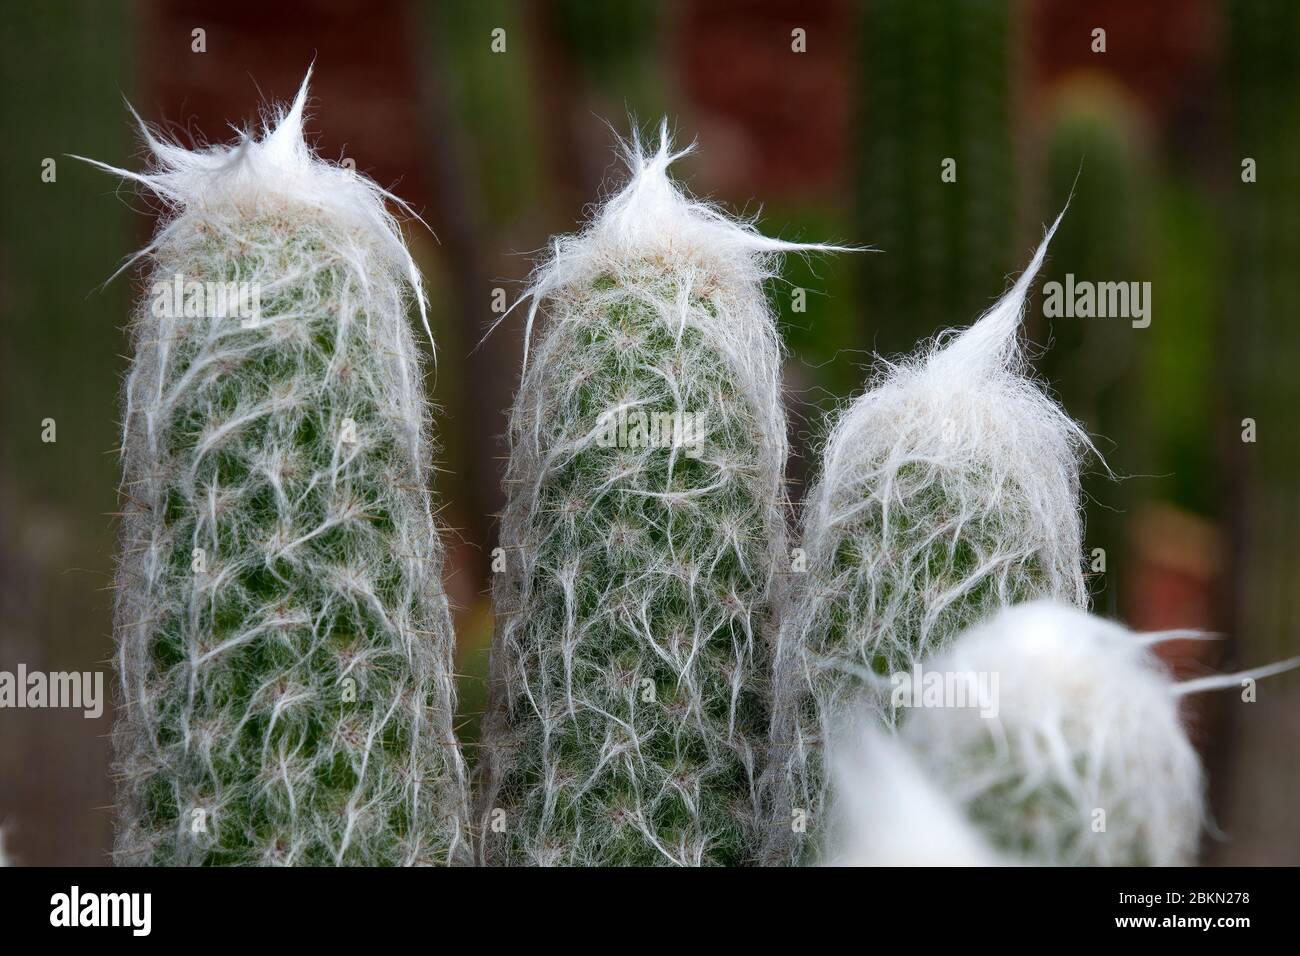 Sydney Australia, woolly tops of a touch cactus in garden Stock Photo